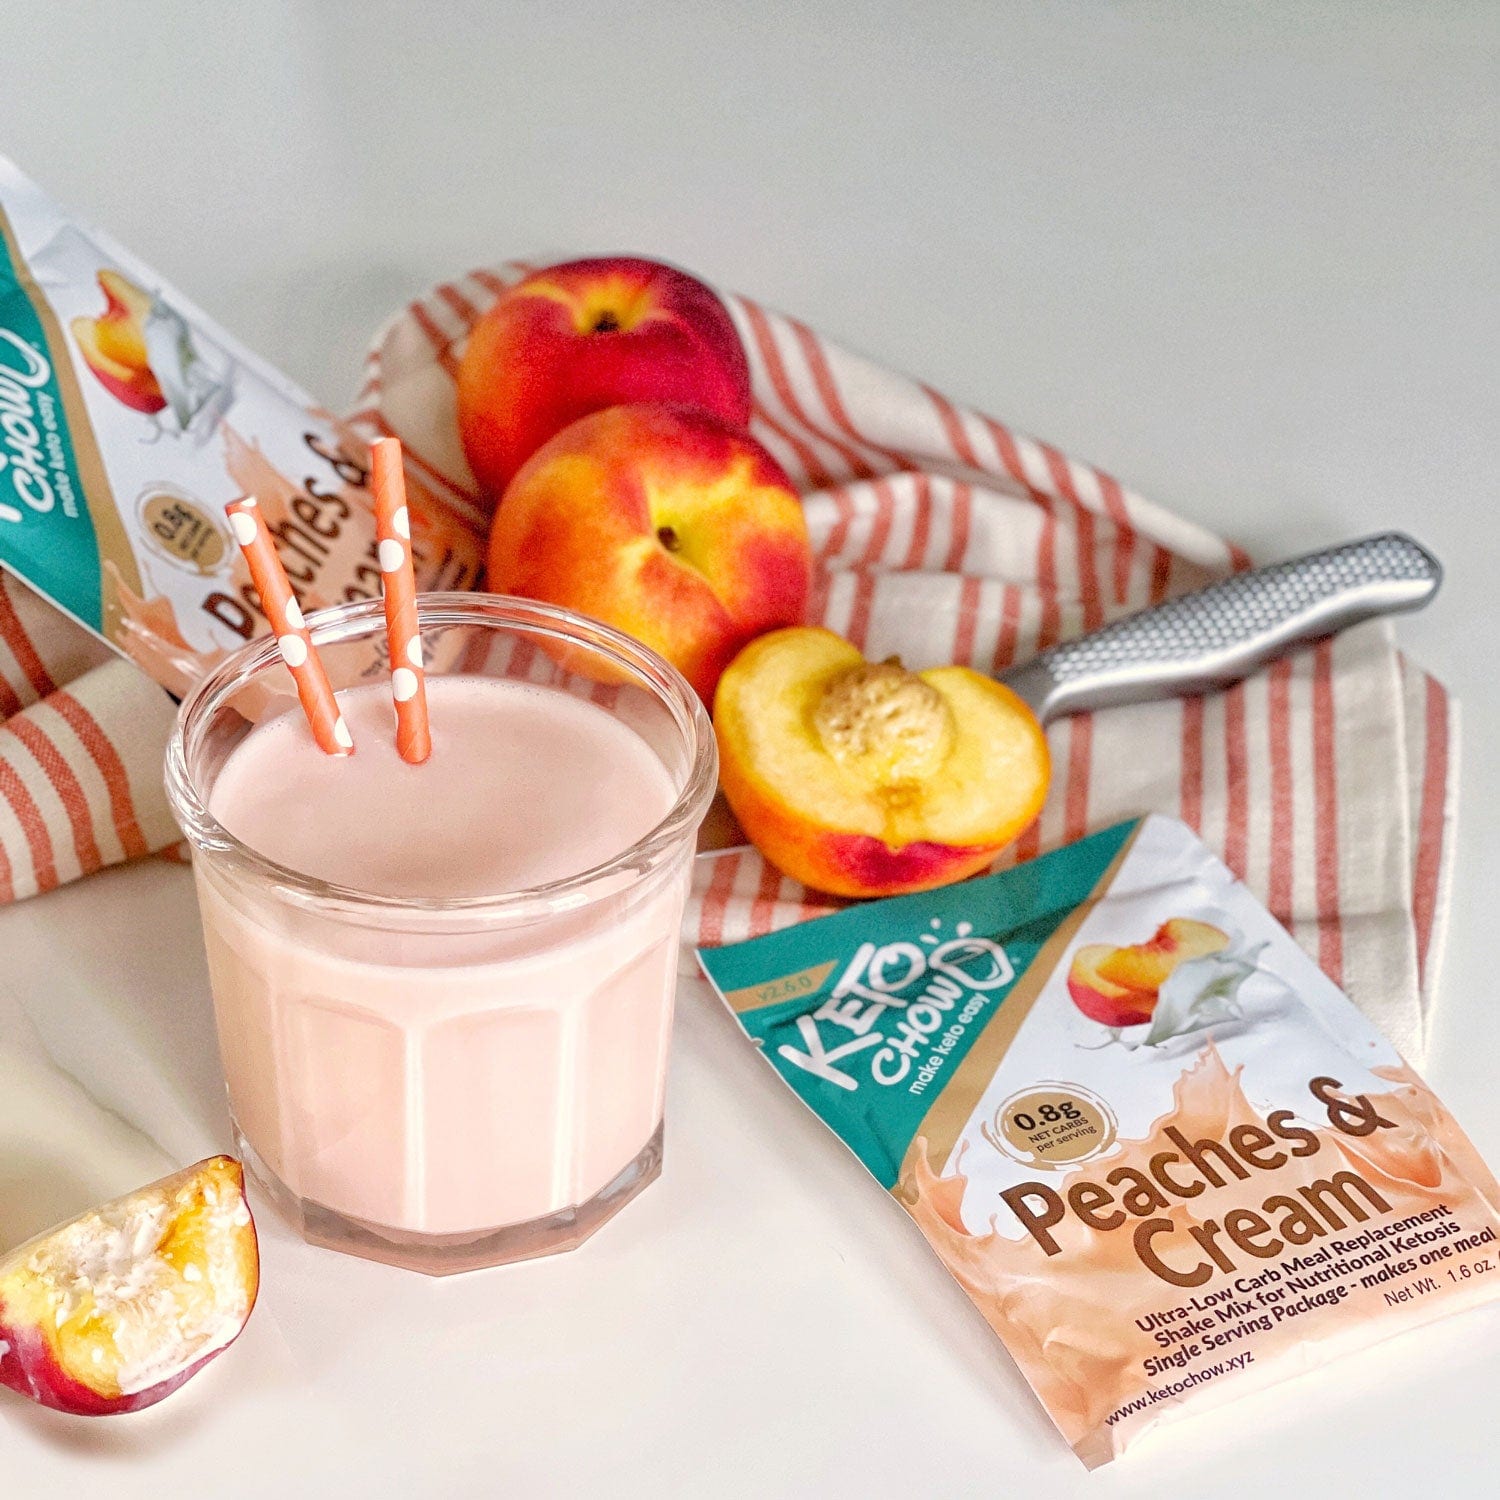 Peaches and Cream Keto Chow Single Meal Packet and shake with peaches and cooking tools in background